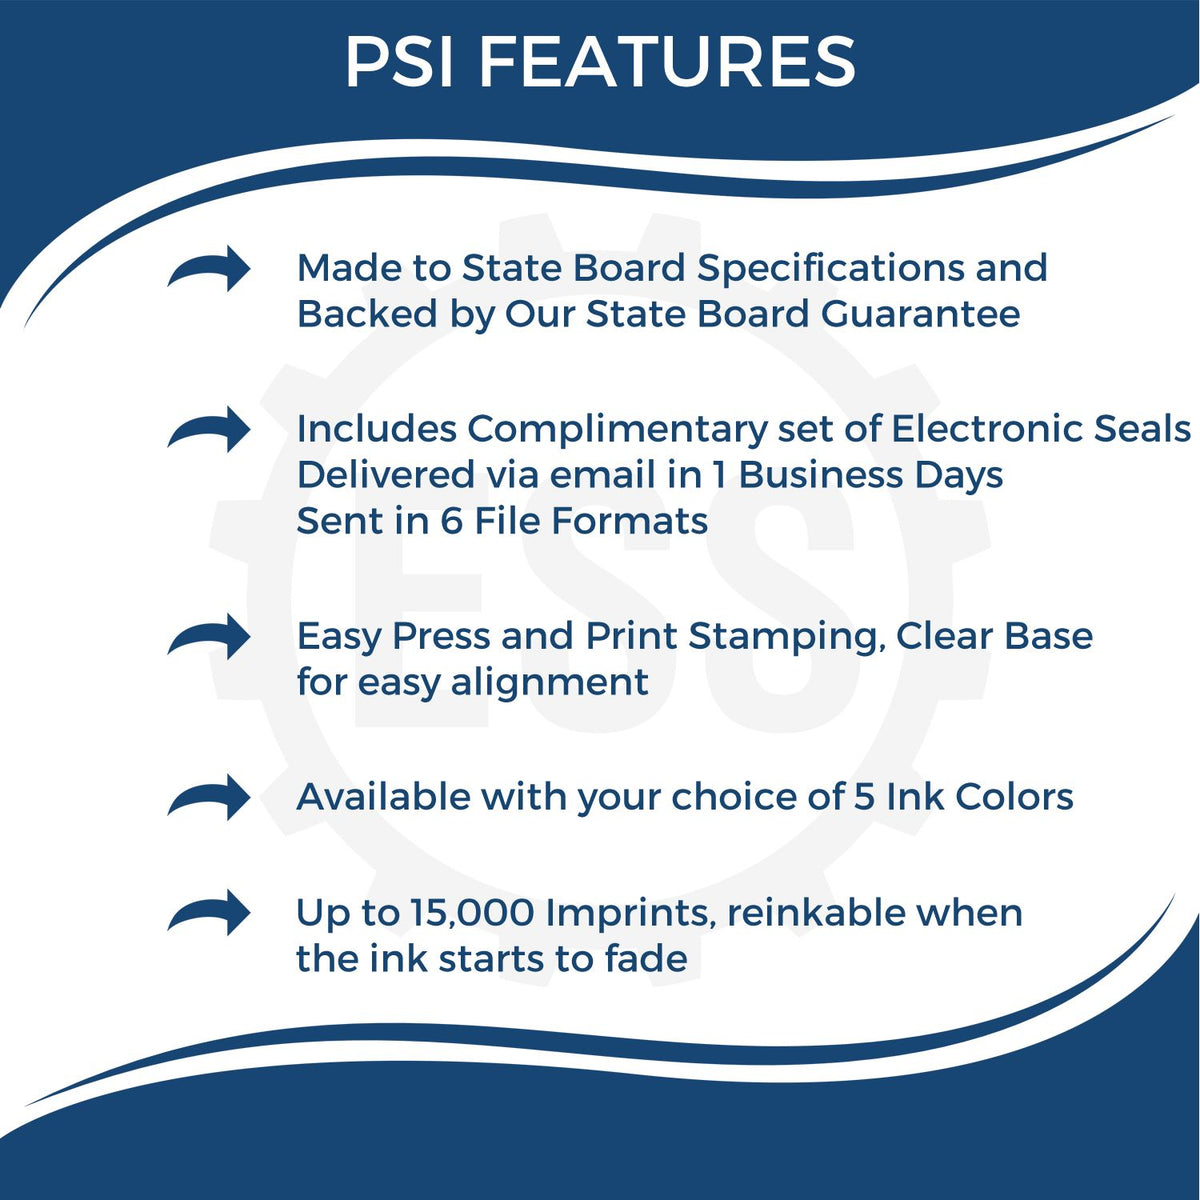 A picture of an infographic highlighting the selling points for the PSI Puerto Rico Notary Stamp